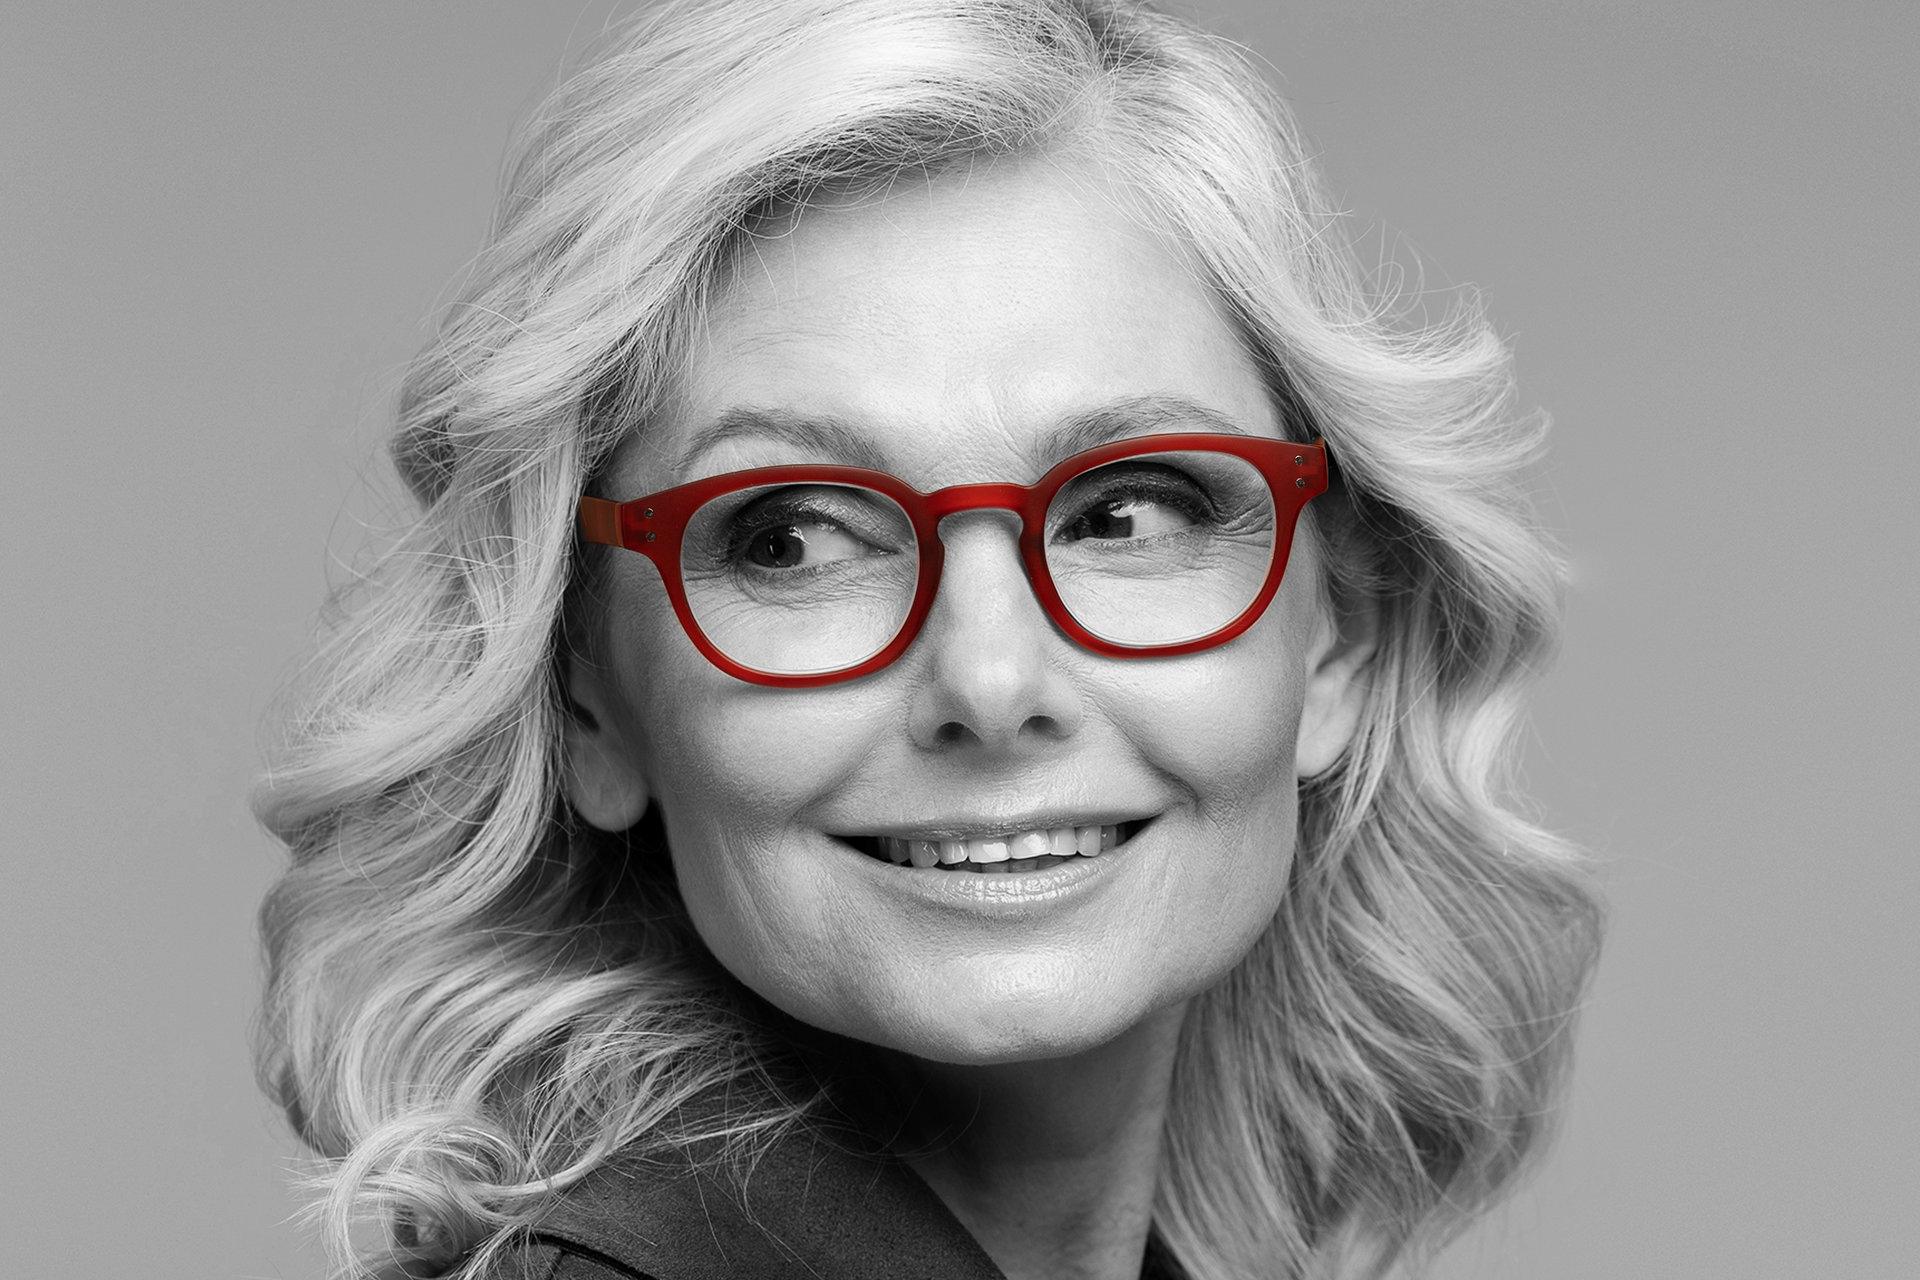 a woman wearing red glasses is smiling in a black and white photo